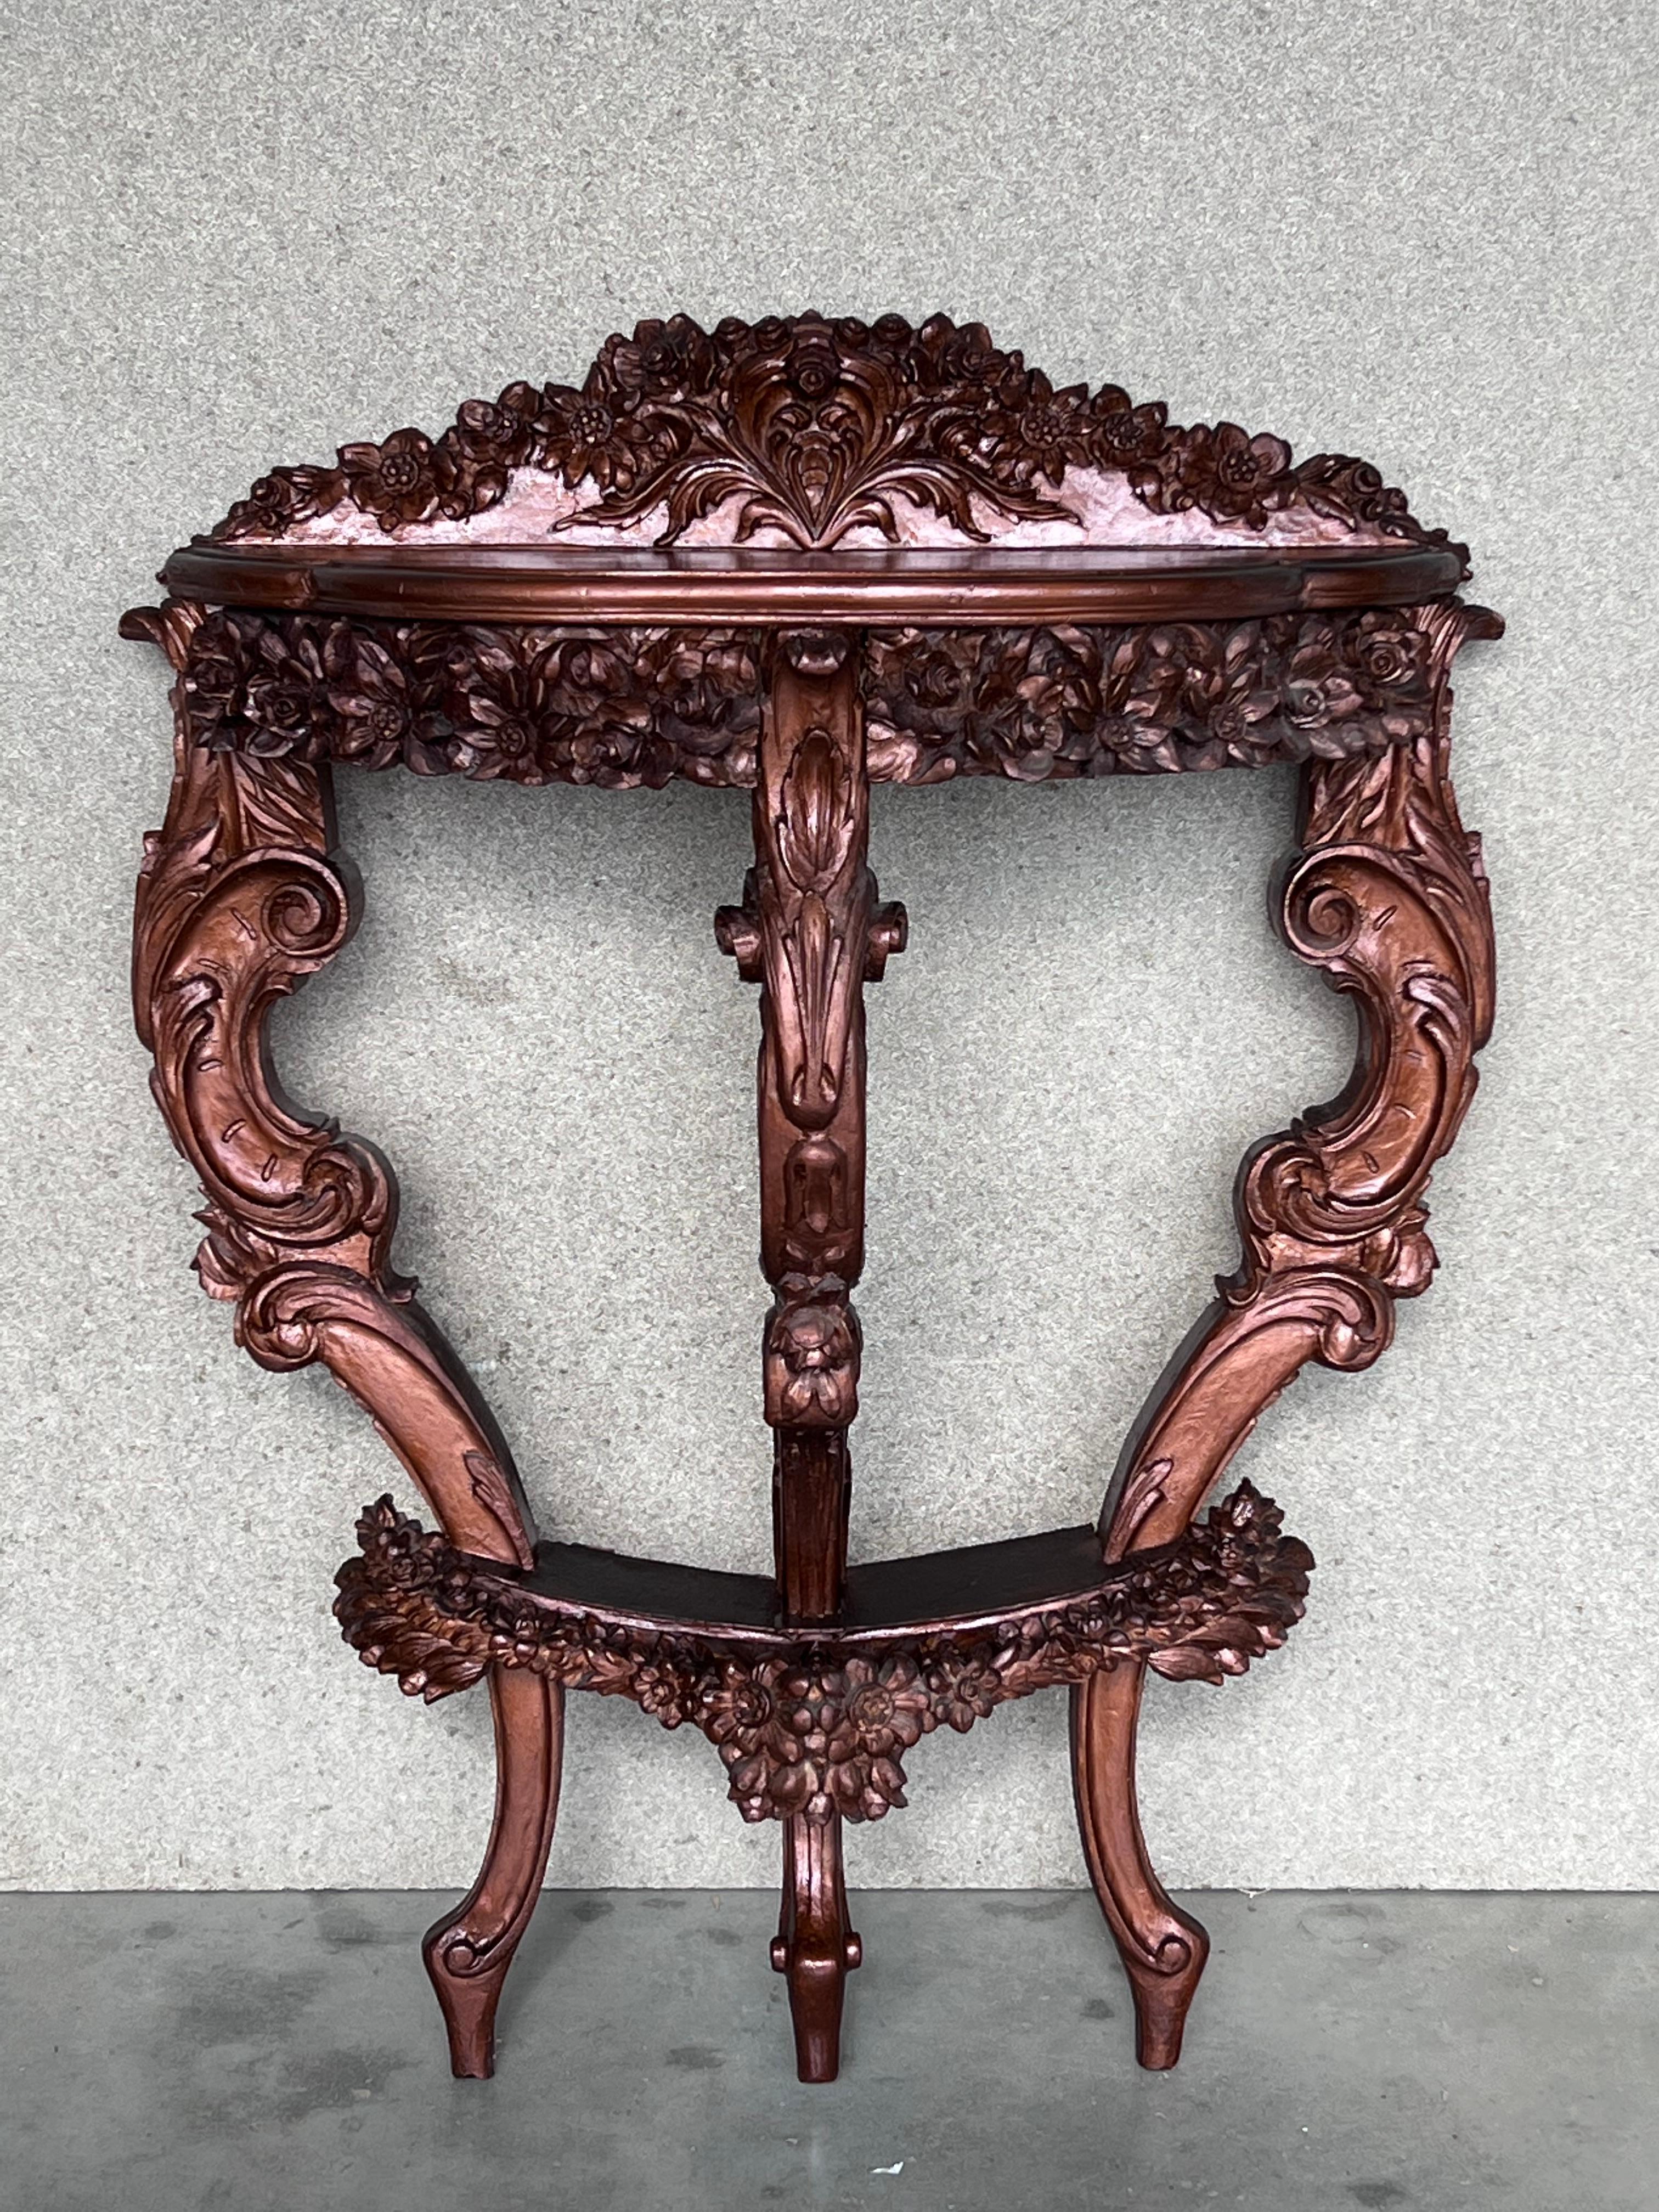 19th century French Regence style beautifully carved with leaves walnut console. Hand-carved frieze supported by three cabriole legs connected by X-form stretchers centered by large urn.
 